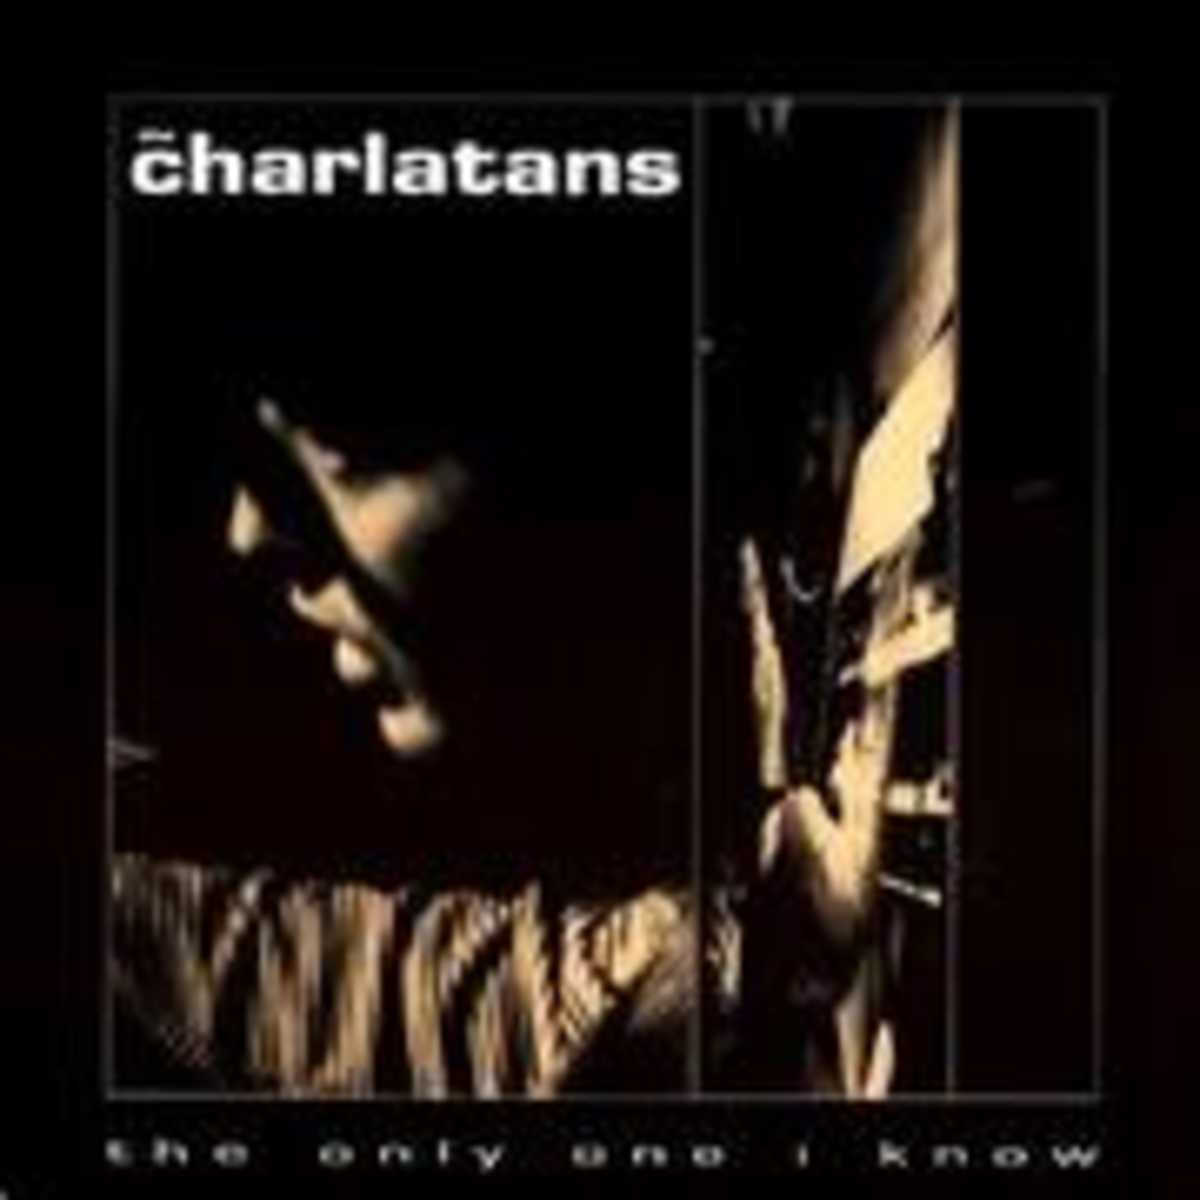 The Charlatans - The only one I know